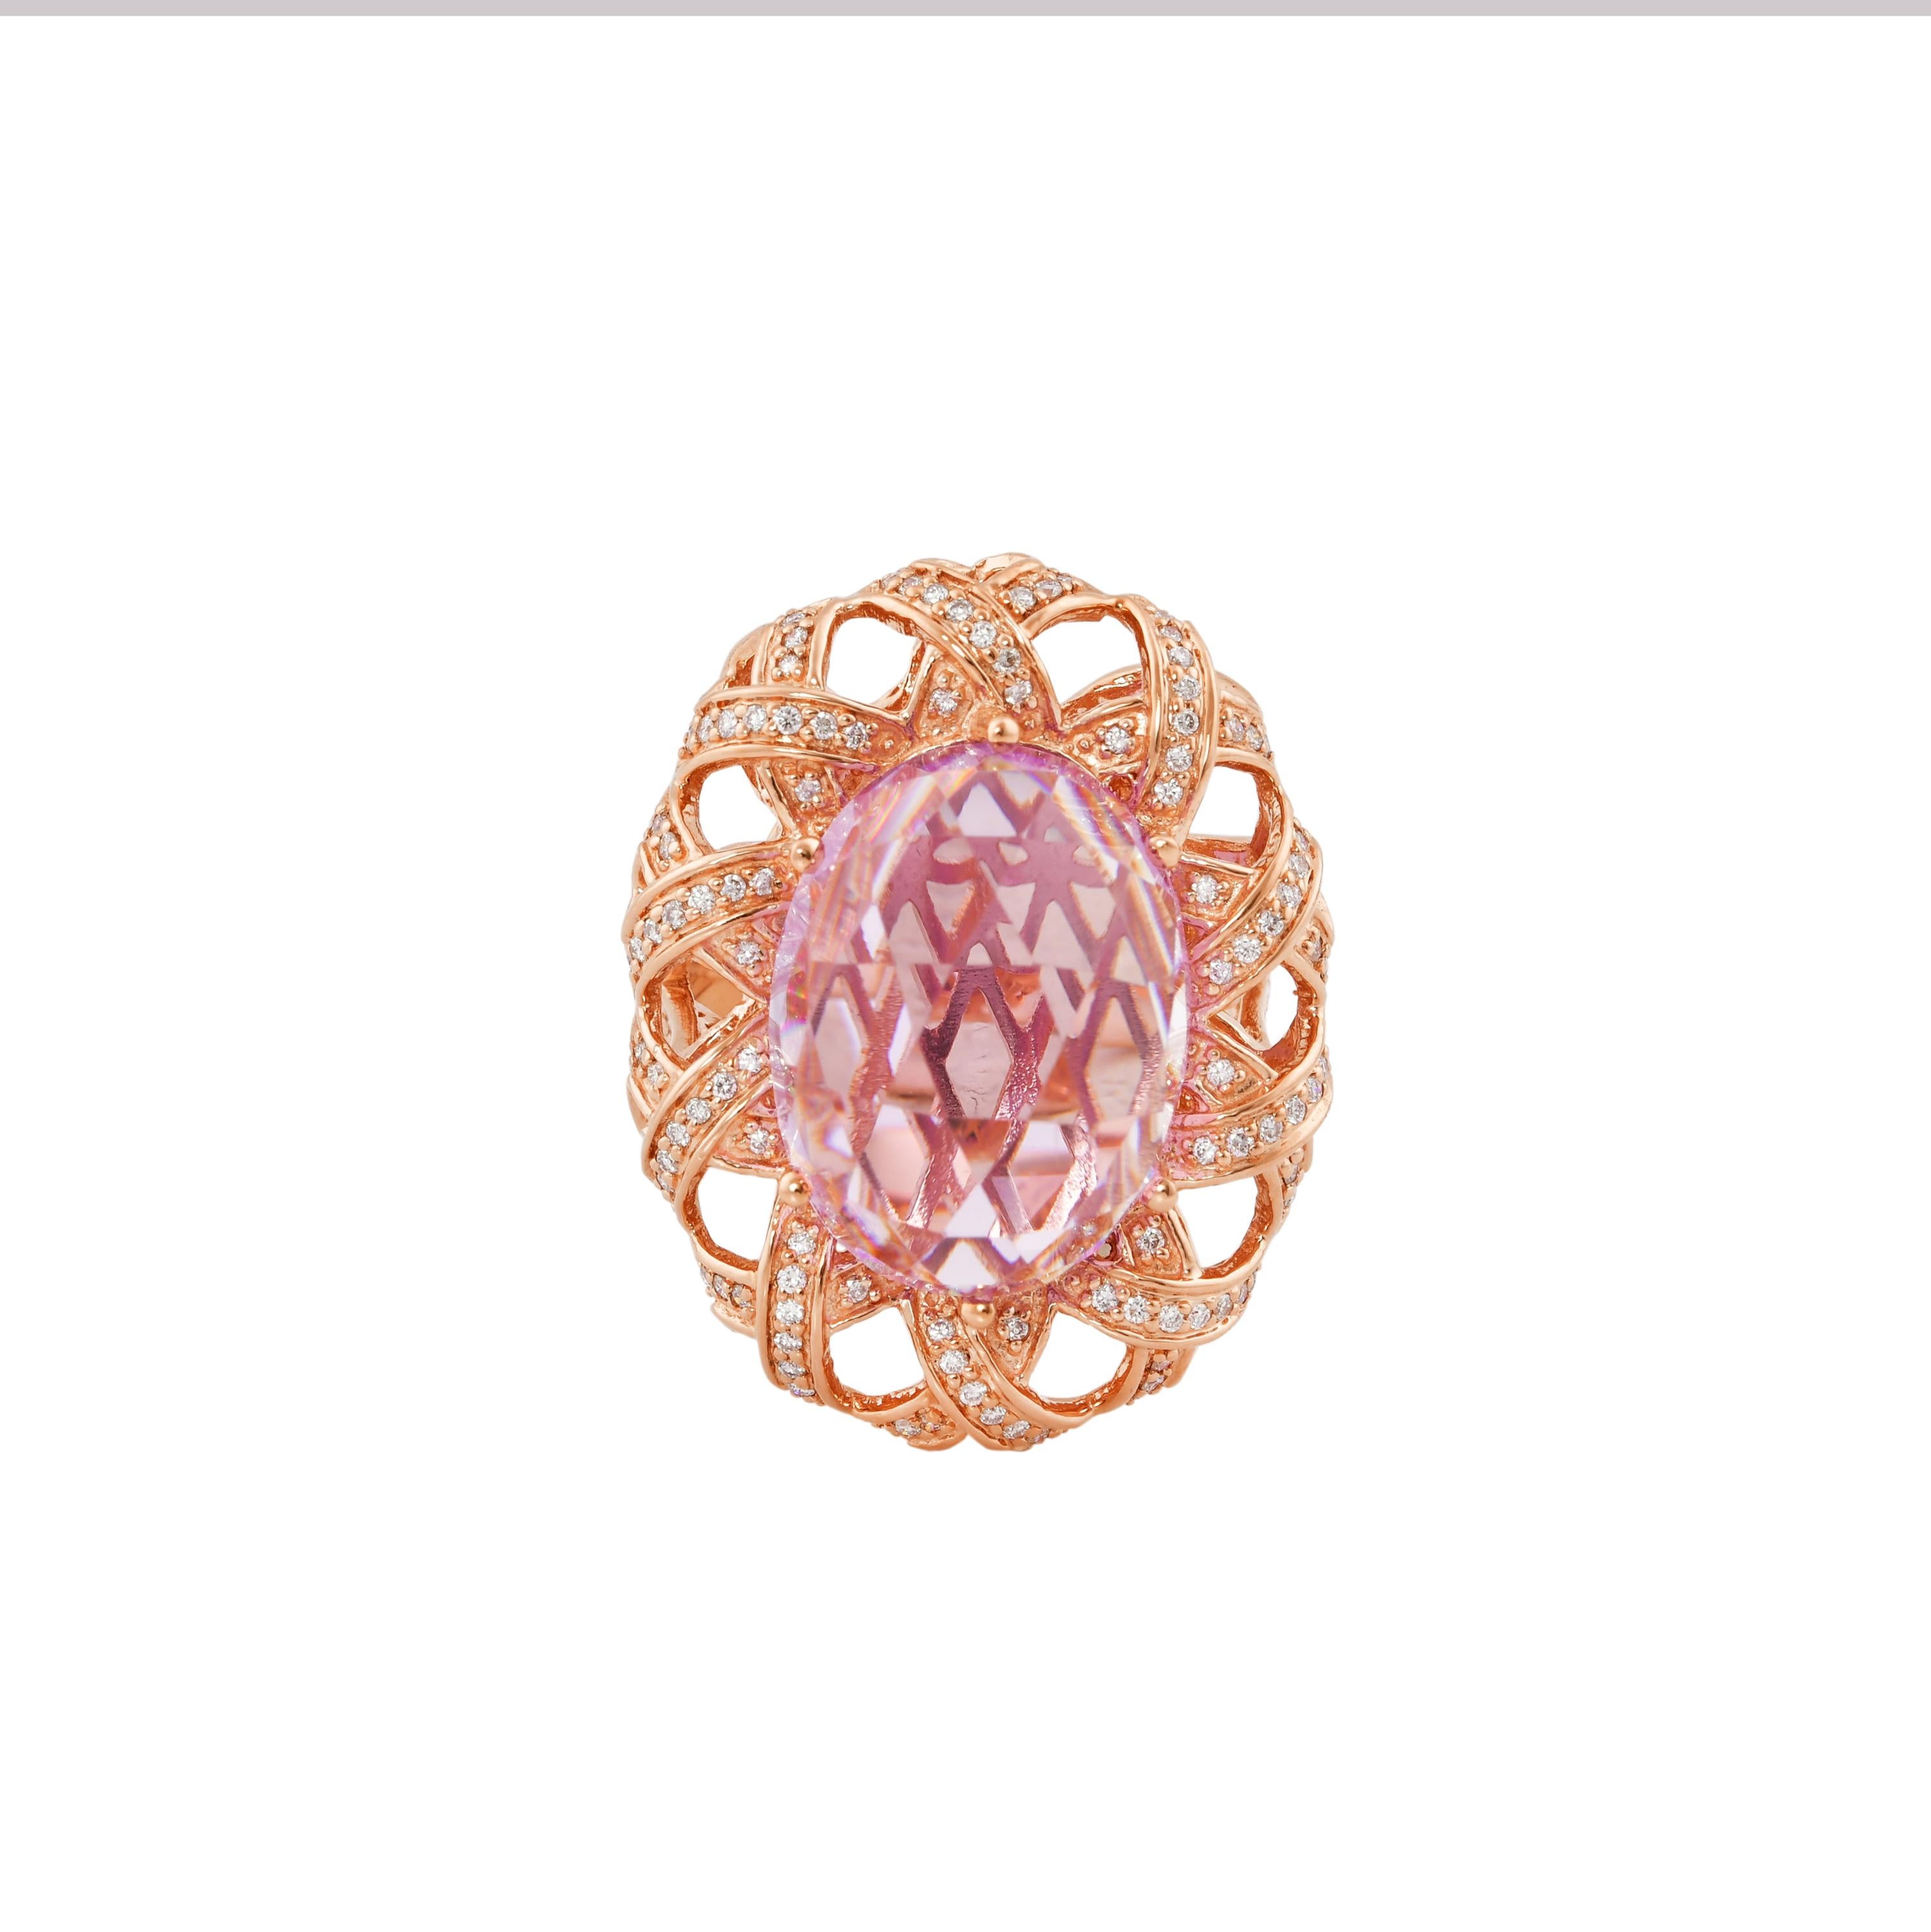 Contemporary 14.2 Carat Amethyst and Diamond Ring in 14 Karat Rose Gold For Sale